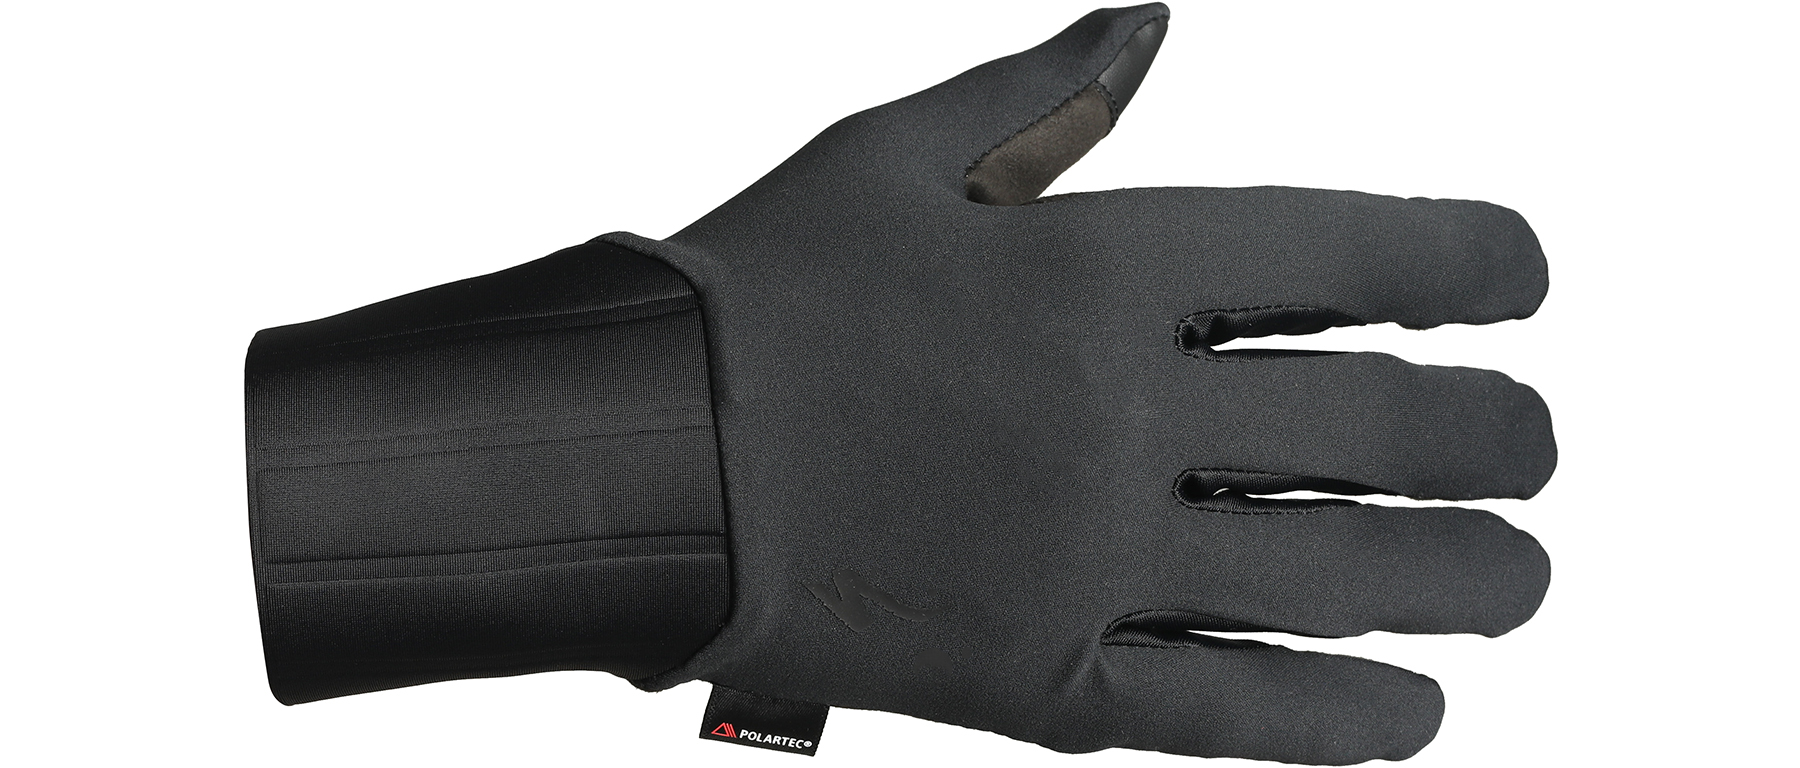 Specialized Neoshell Thermal Glove